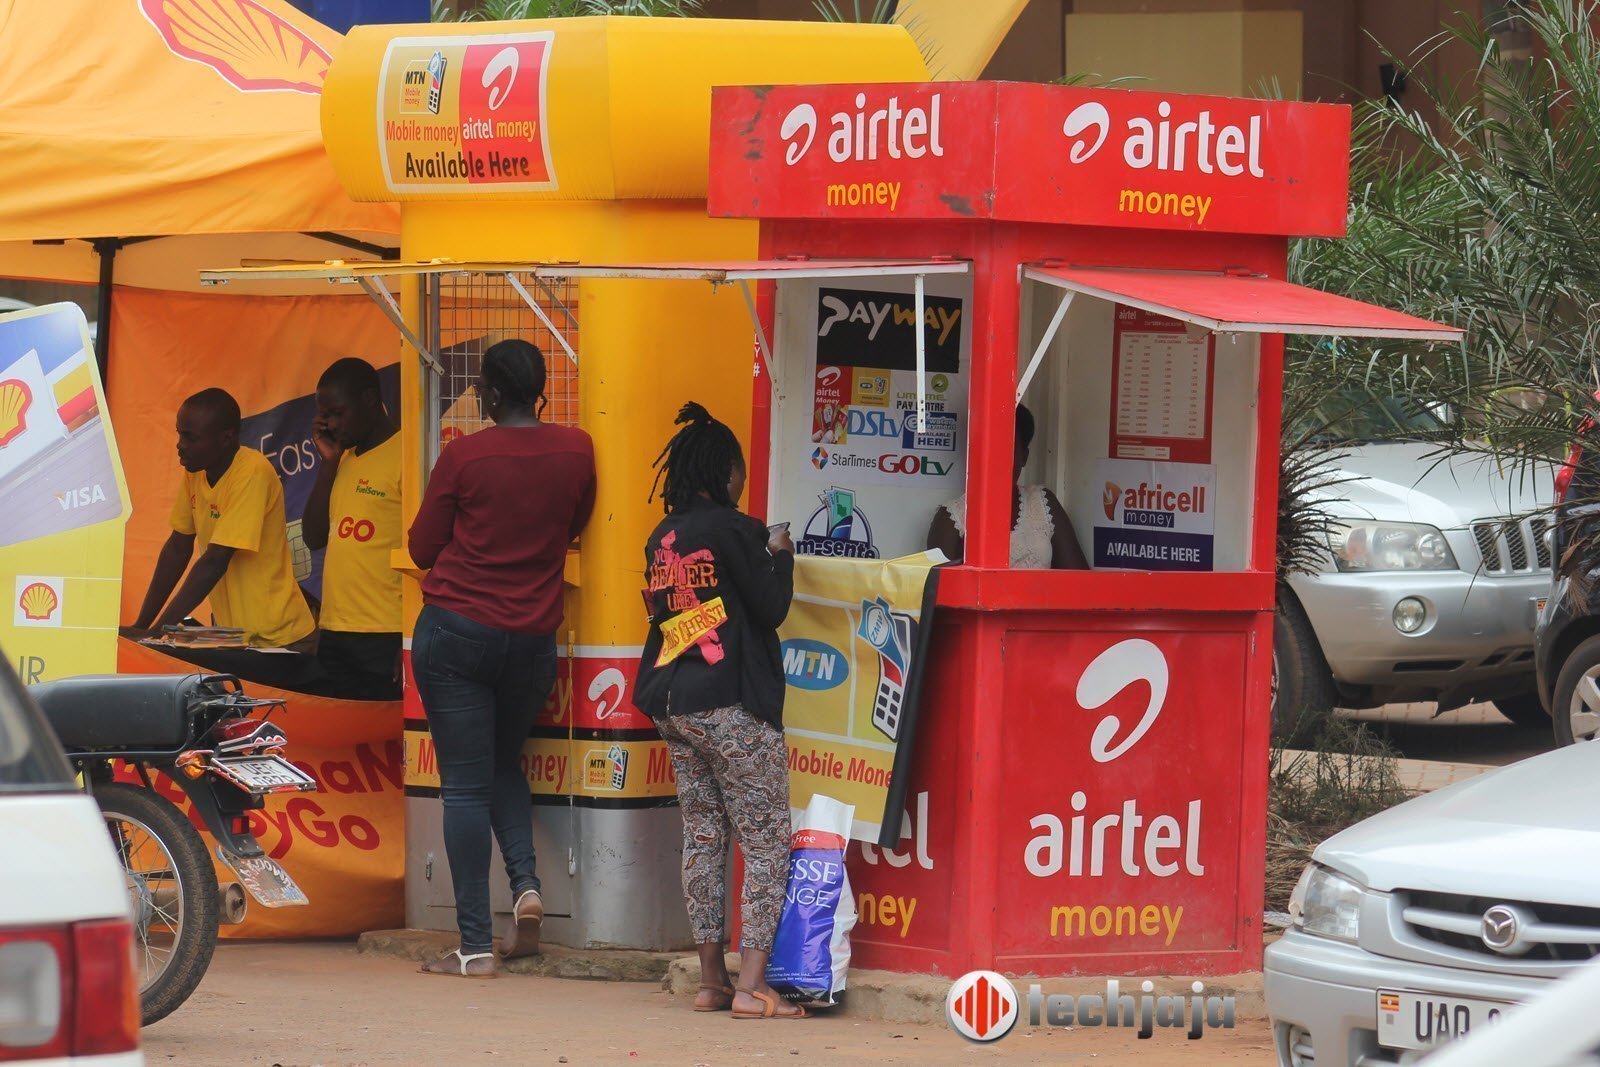 Hackers have broken into Mobile money systems